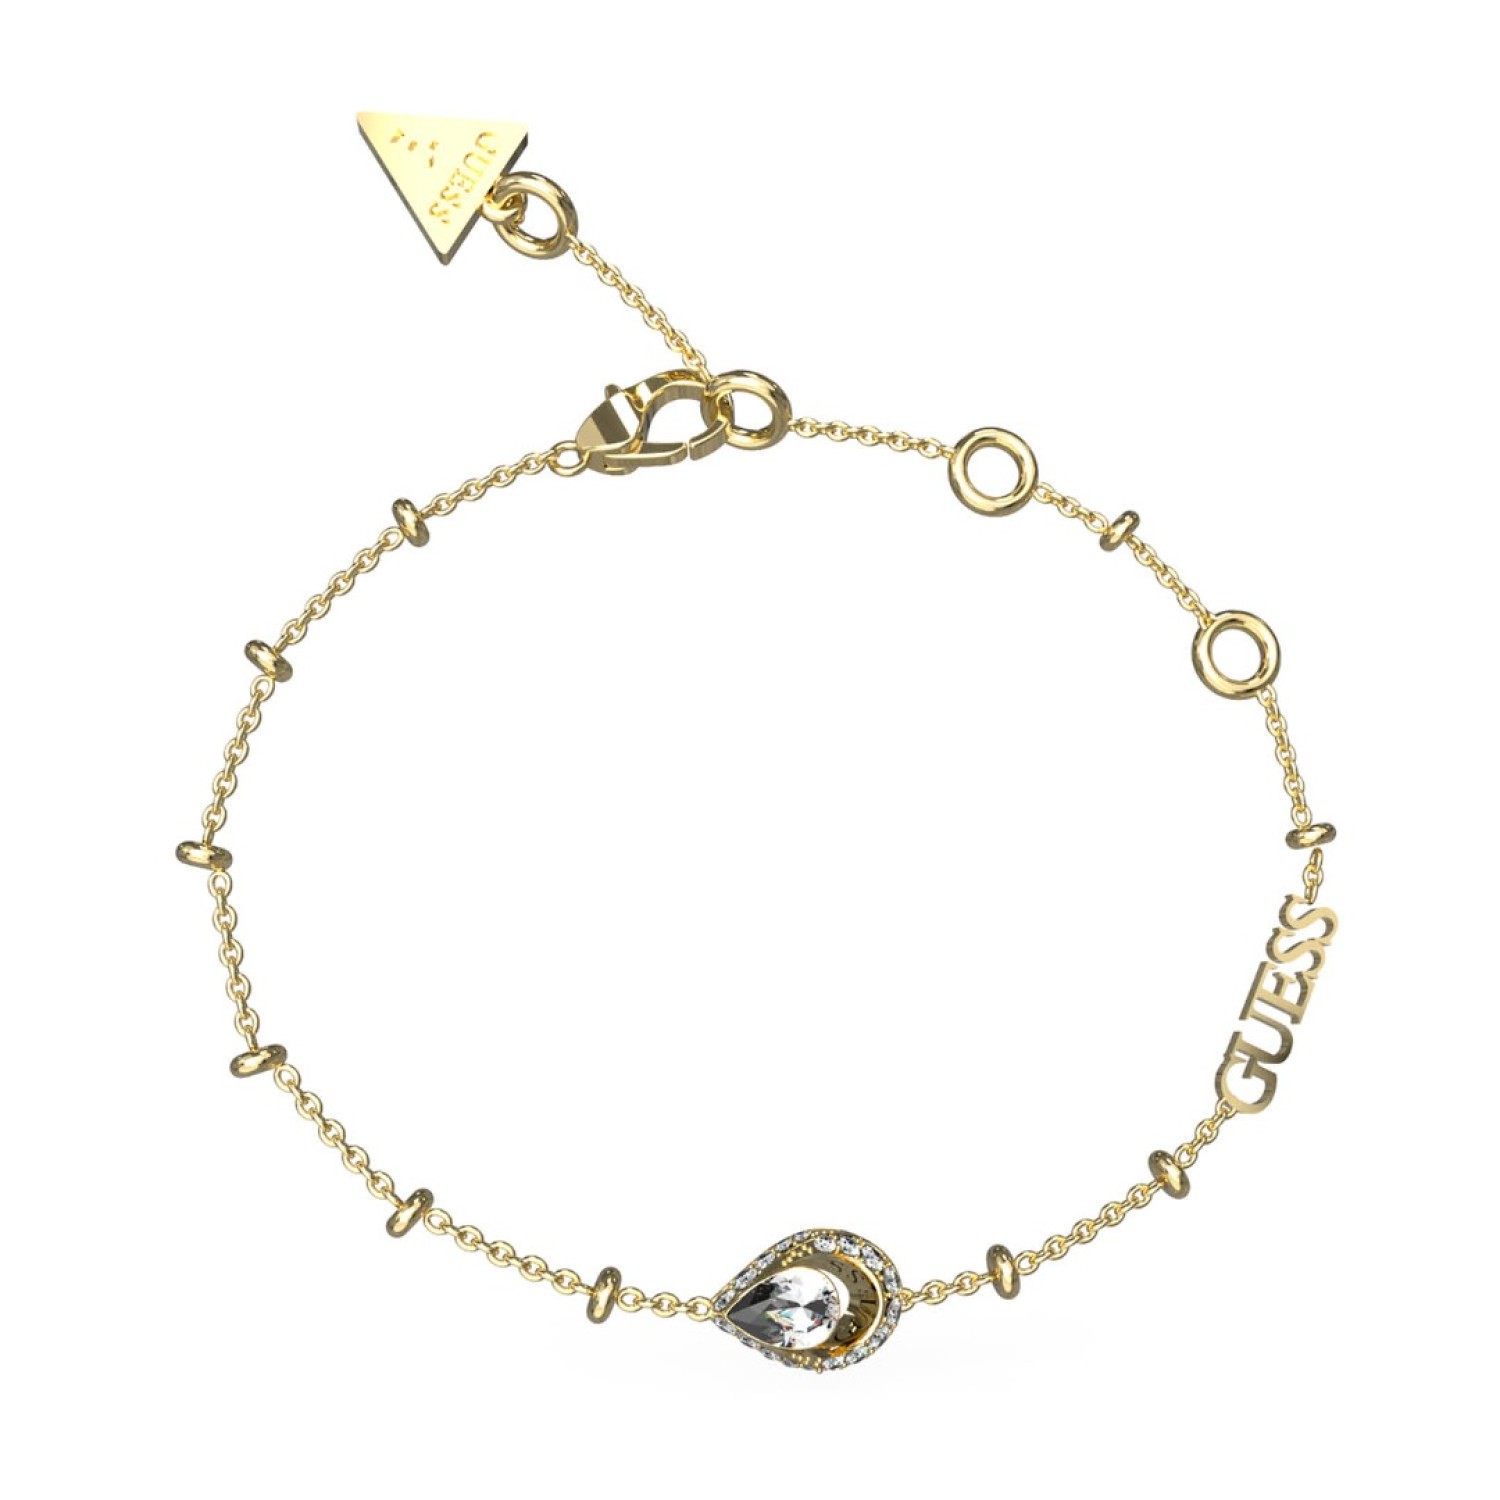 GUESS Crystal Drop Bracelet JUBB03392JWYGL in Gold JUBB03392JWYGEML Guess Jewellery Auckland | GUESS jewellery effortlessly transitions from daytime to nighttime wear, Fast Free Delivery from Auckland